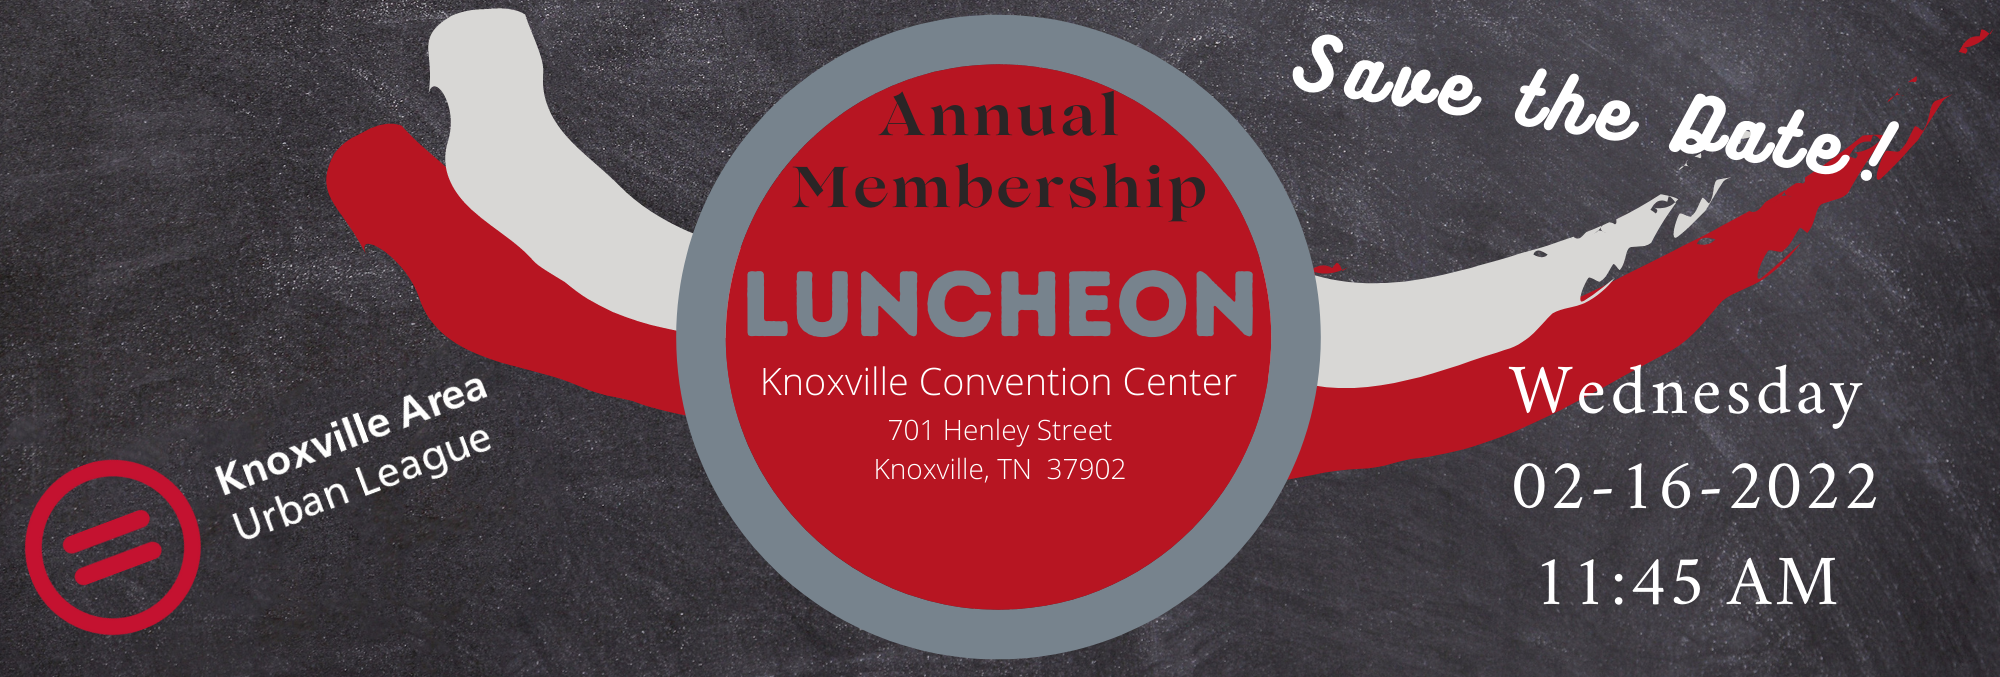 Annual Luncheon Invitation Save the Date Slide